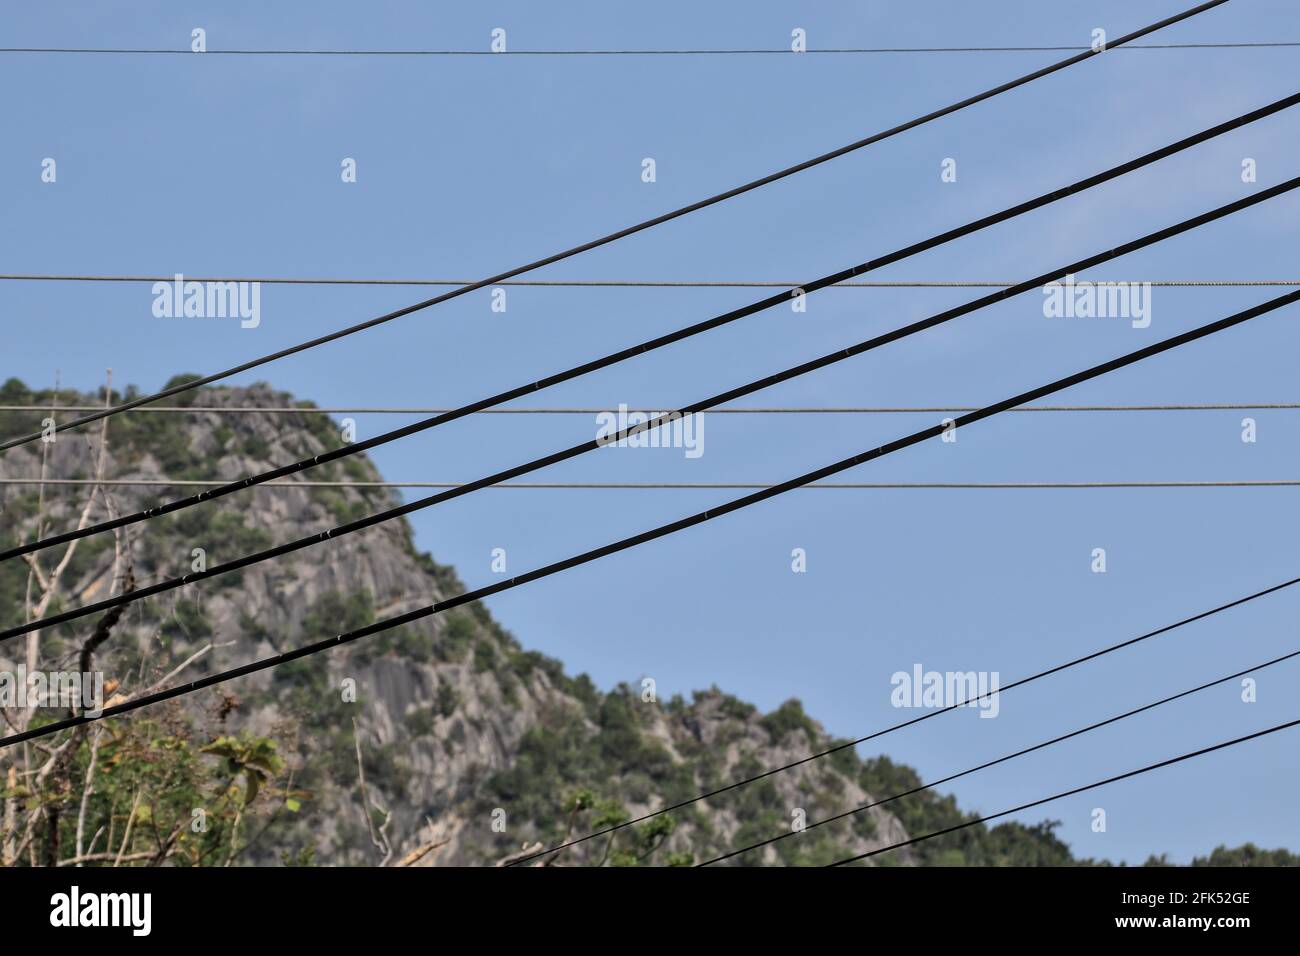 A view of messy art from modern wires and cables. A traditional natural mountain backdrop. Stock Photo